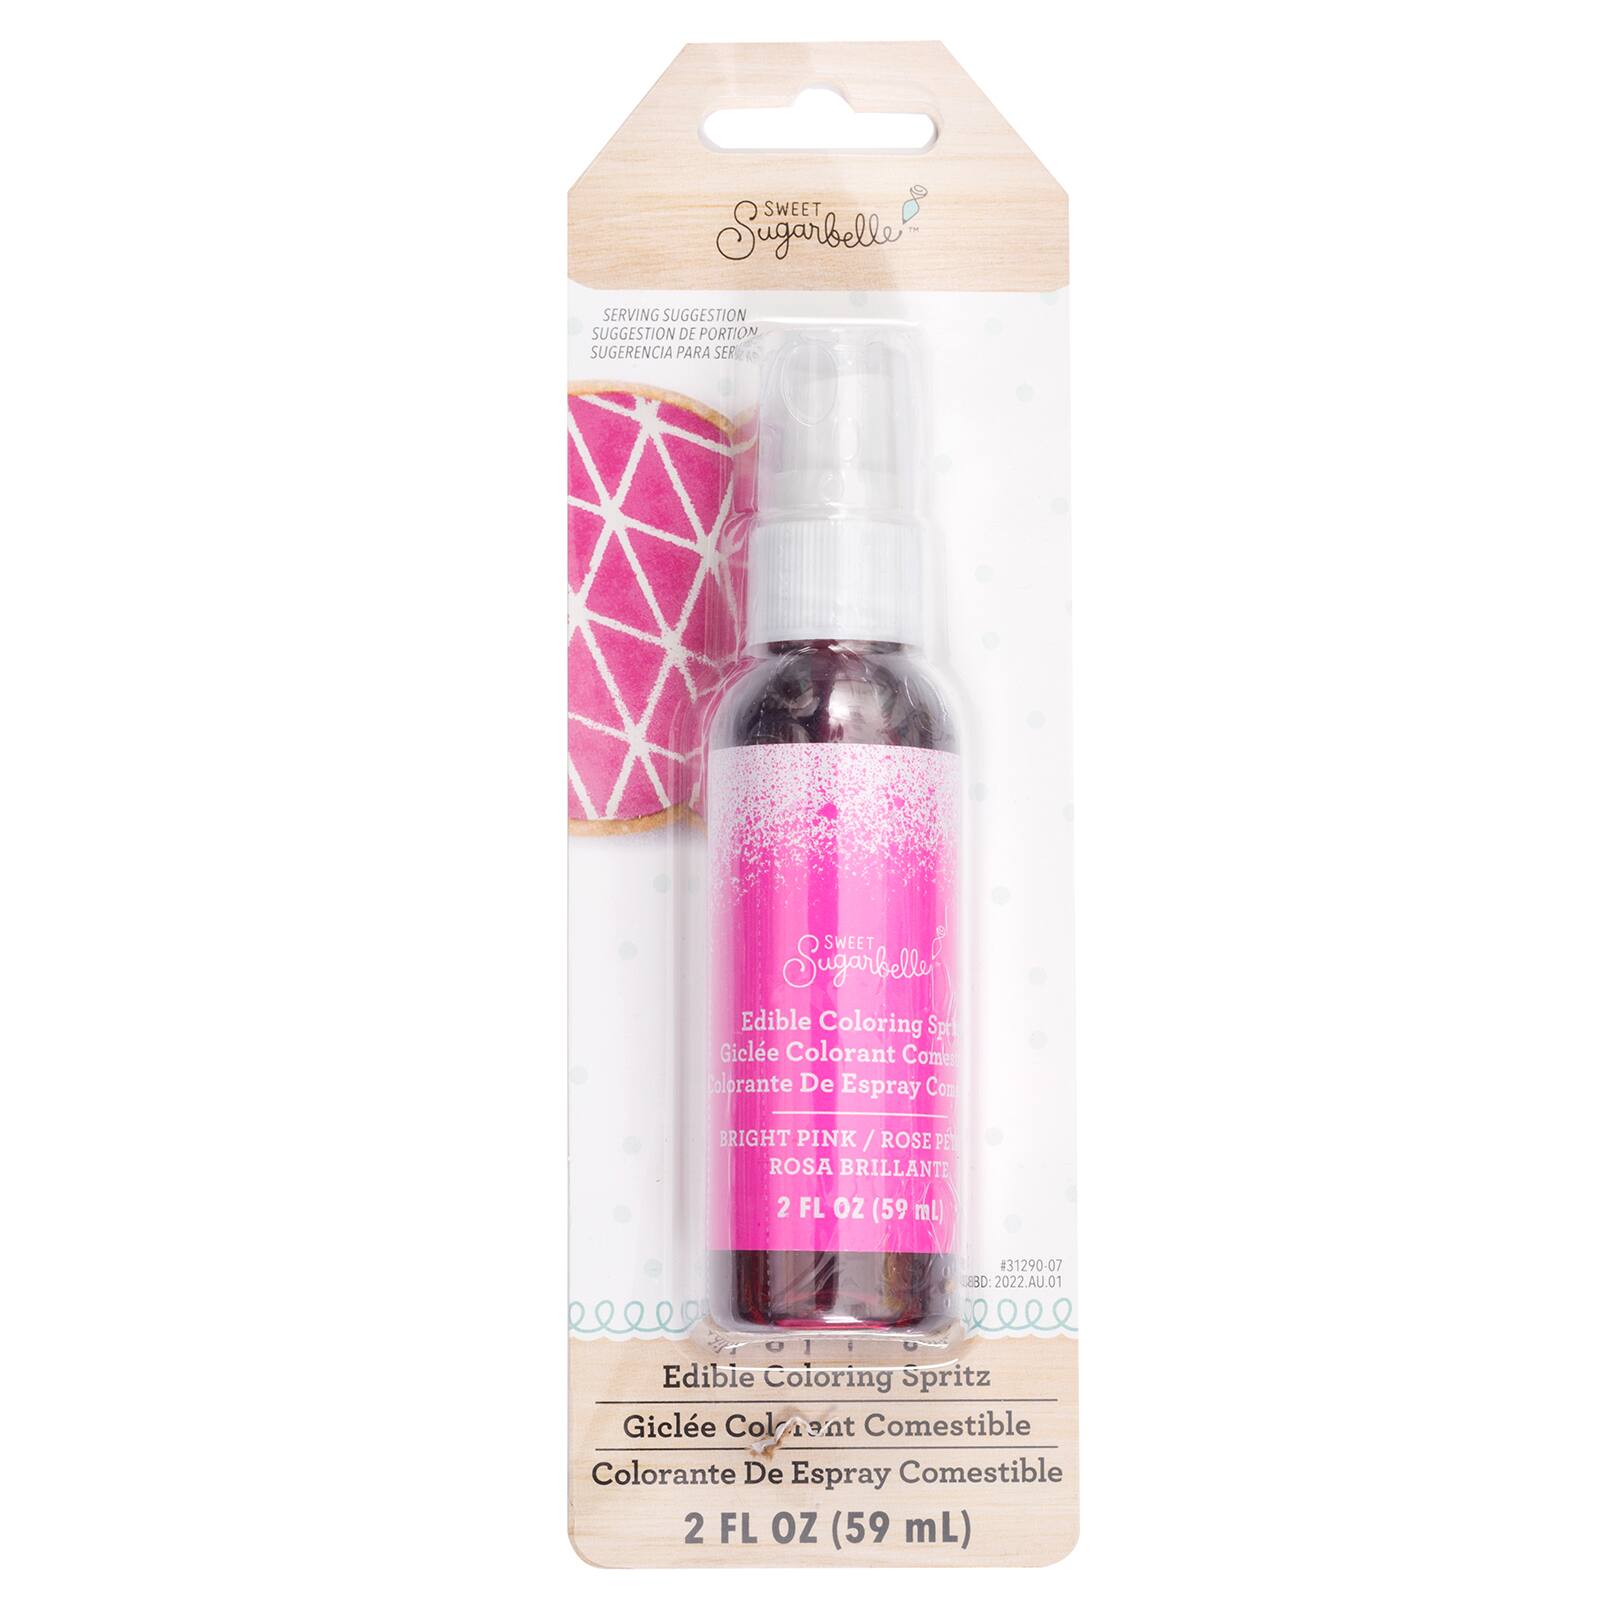 Buy the Sweet Sugarbelle™ Edible Coloring Spritz at Michaels